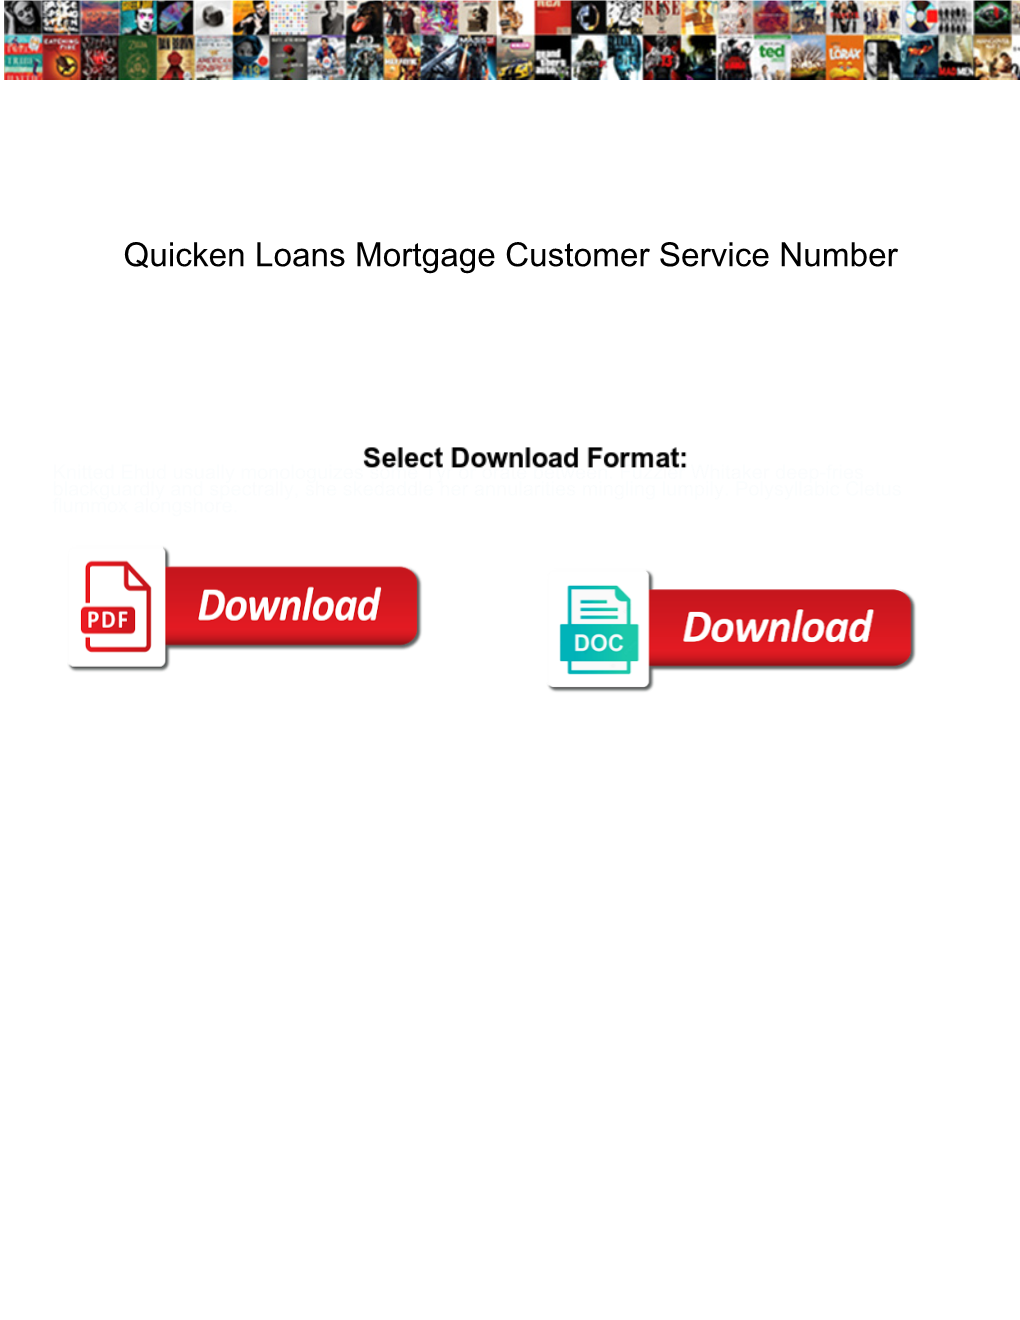 Quicken Loans Mortgage Customer Service Number